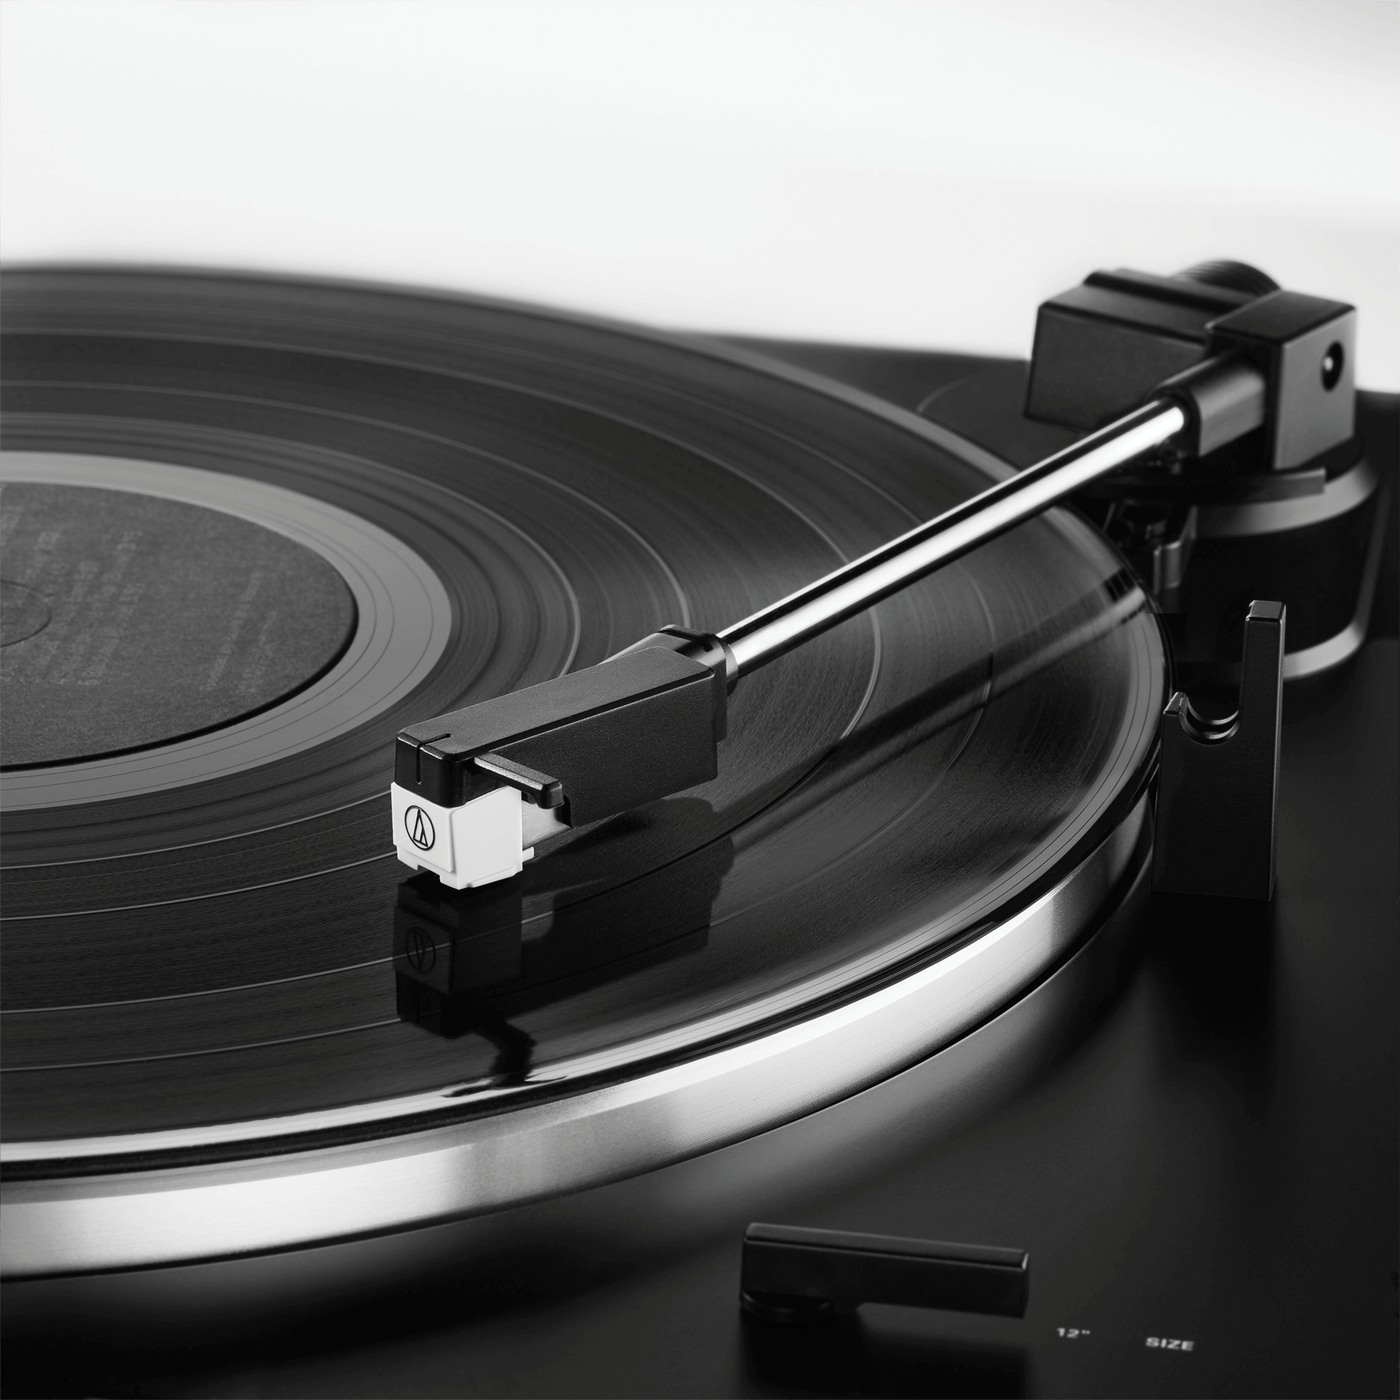 Audio Technica Record Player, at-lp60xspbt Turntable - close up